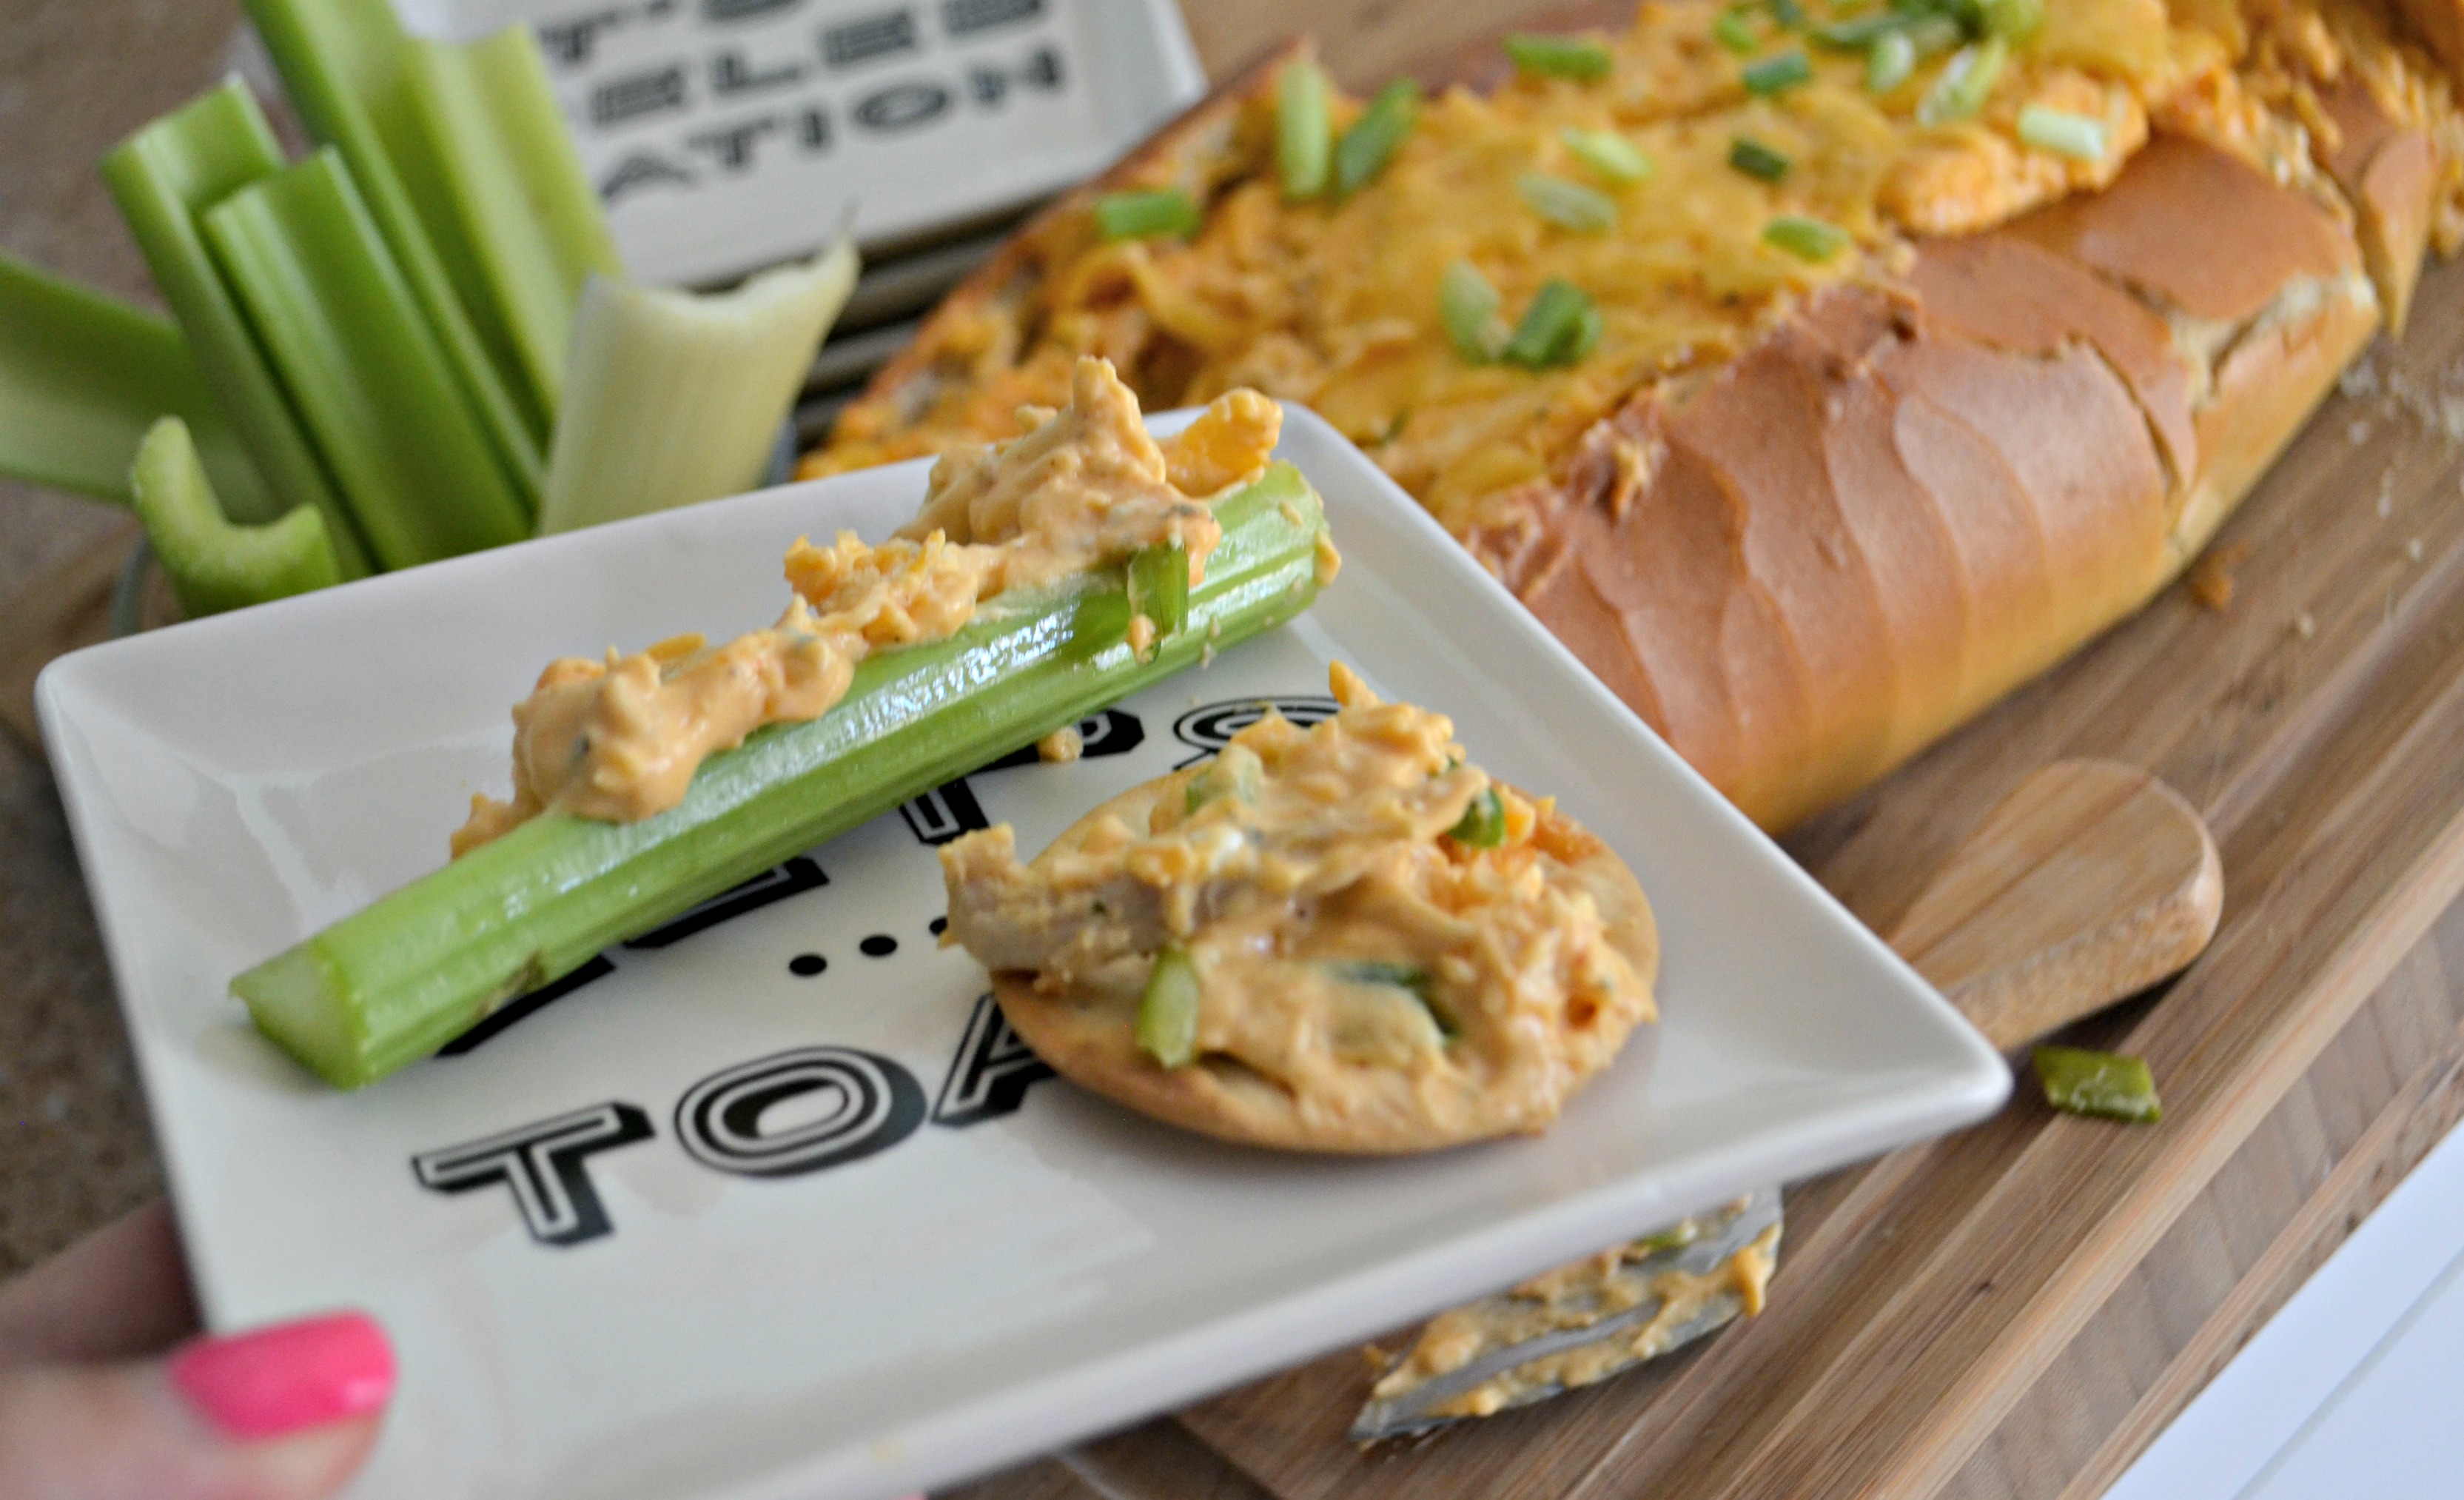 Buffalo Chicken Dip Bread Bowl - served on celery and a cracker